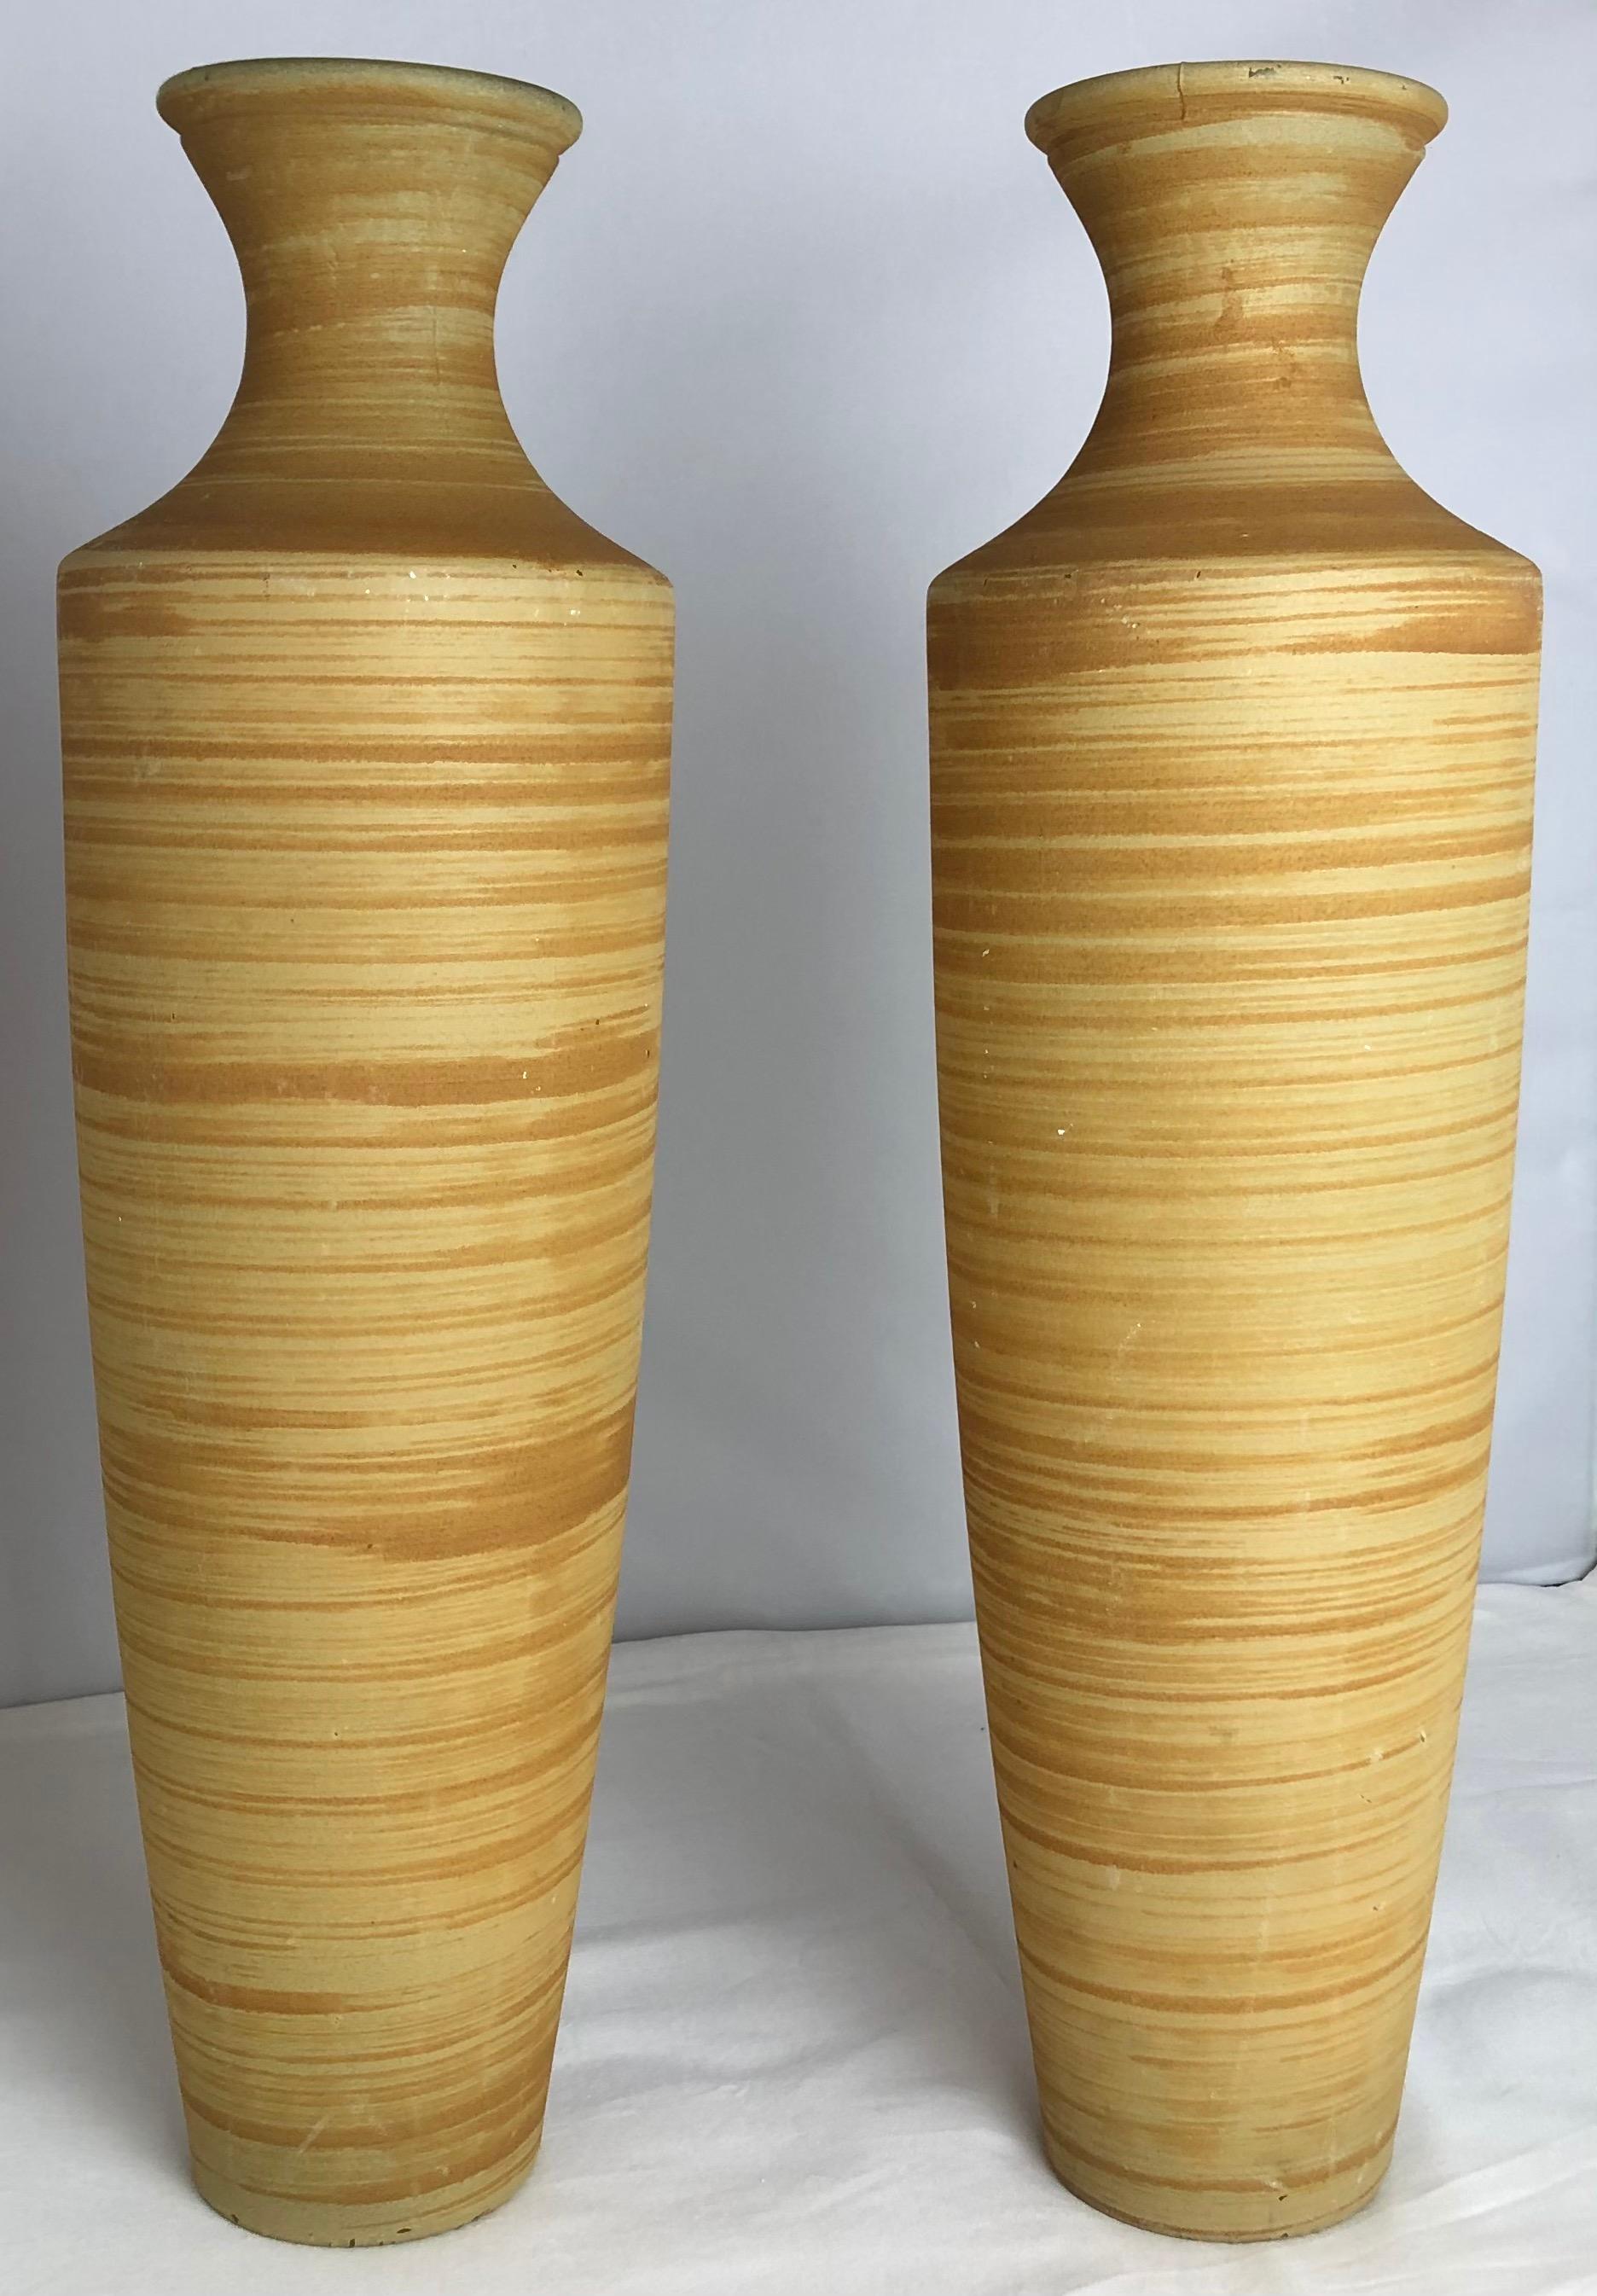 Pair of tall French midcentury cut-glass vases.

Measures: 18